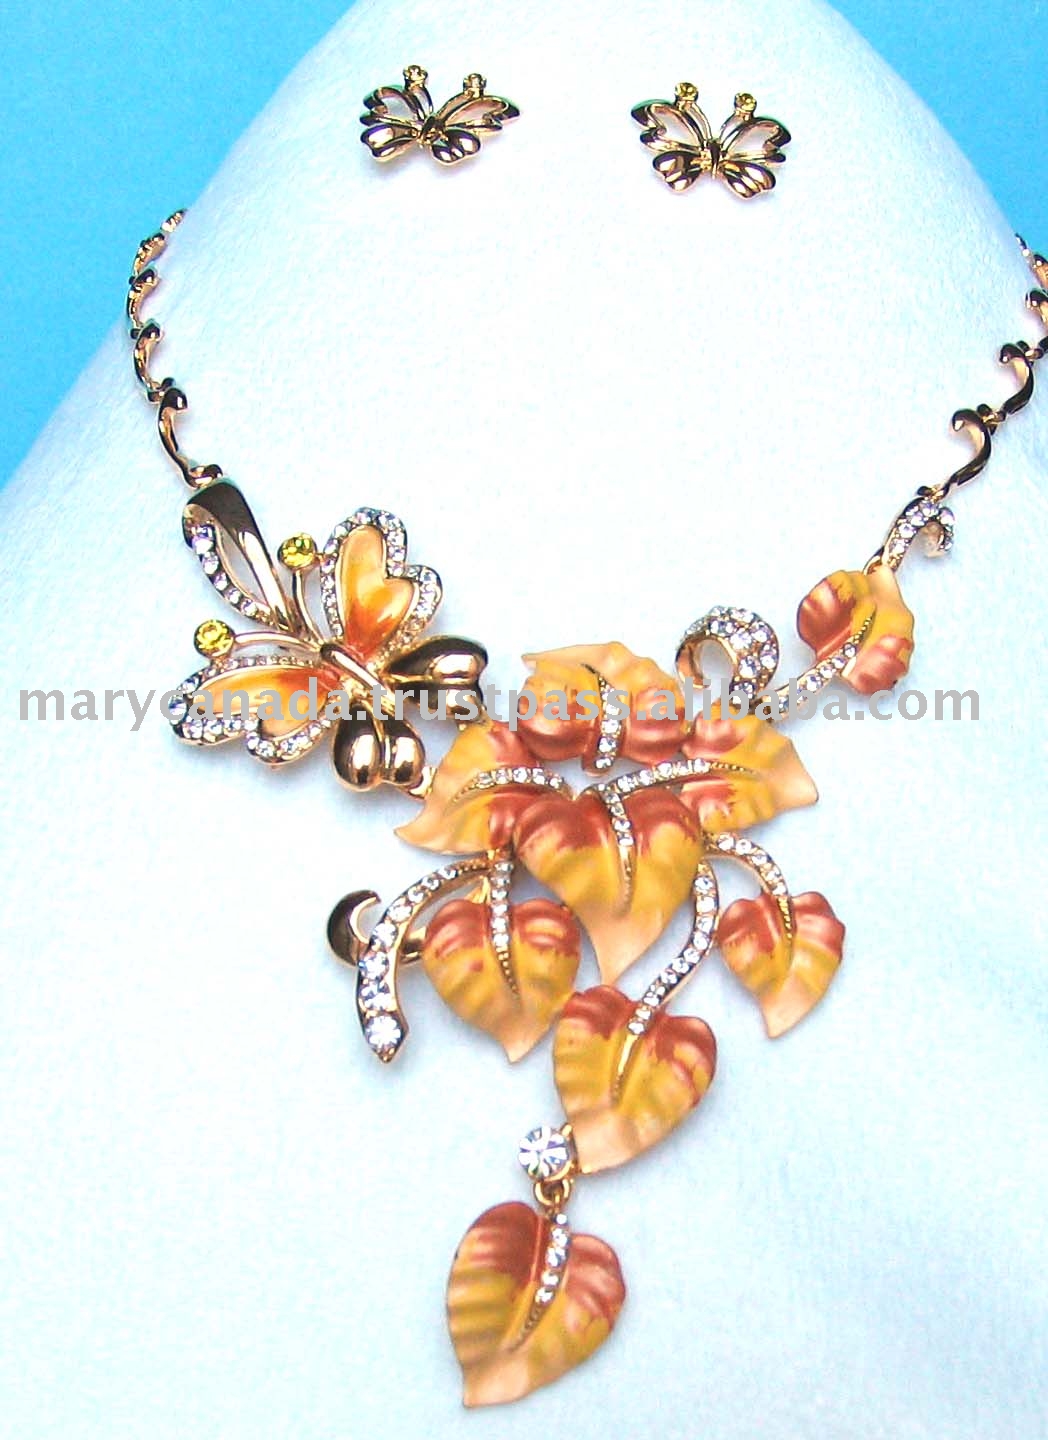 http://img.alibaba.com/photo/100478844/Lacquer_Fashion_Jewelry_Set_With_Citrine_And_Clear_Swarovski_Crystals_Stones.jpg